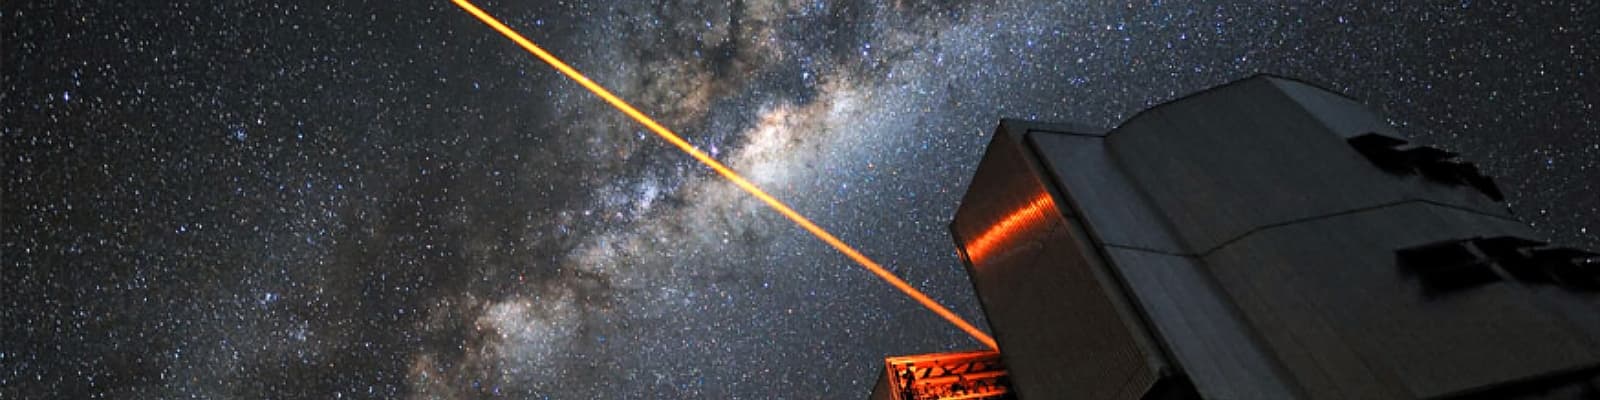 A beam of light leaves a telescope dome at night